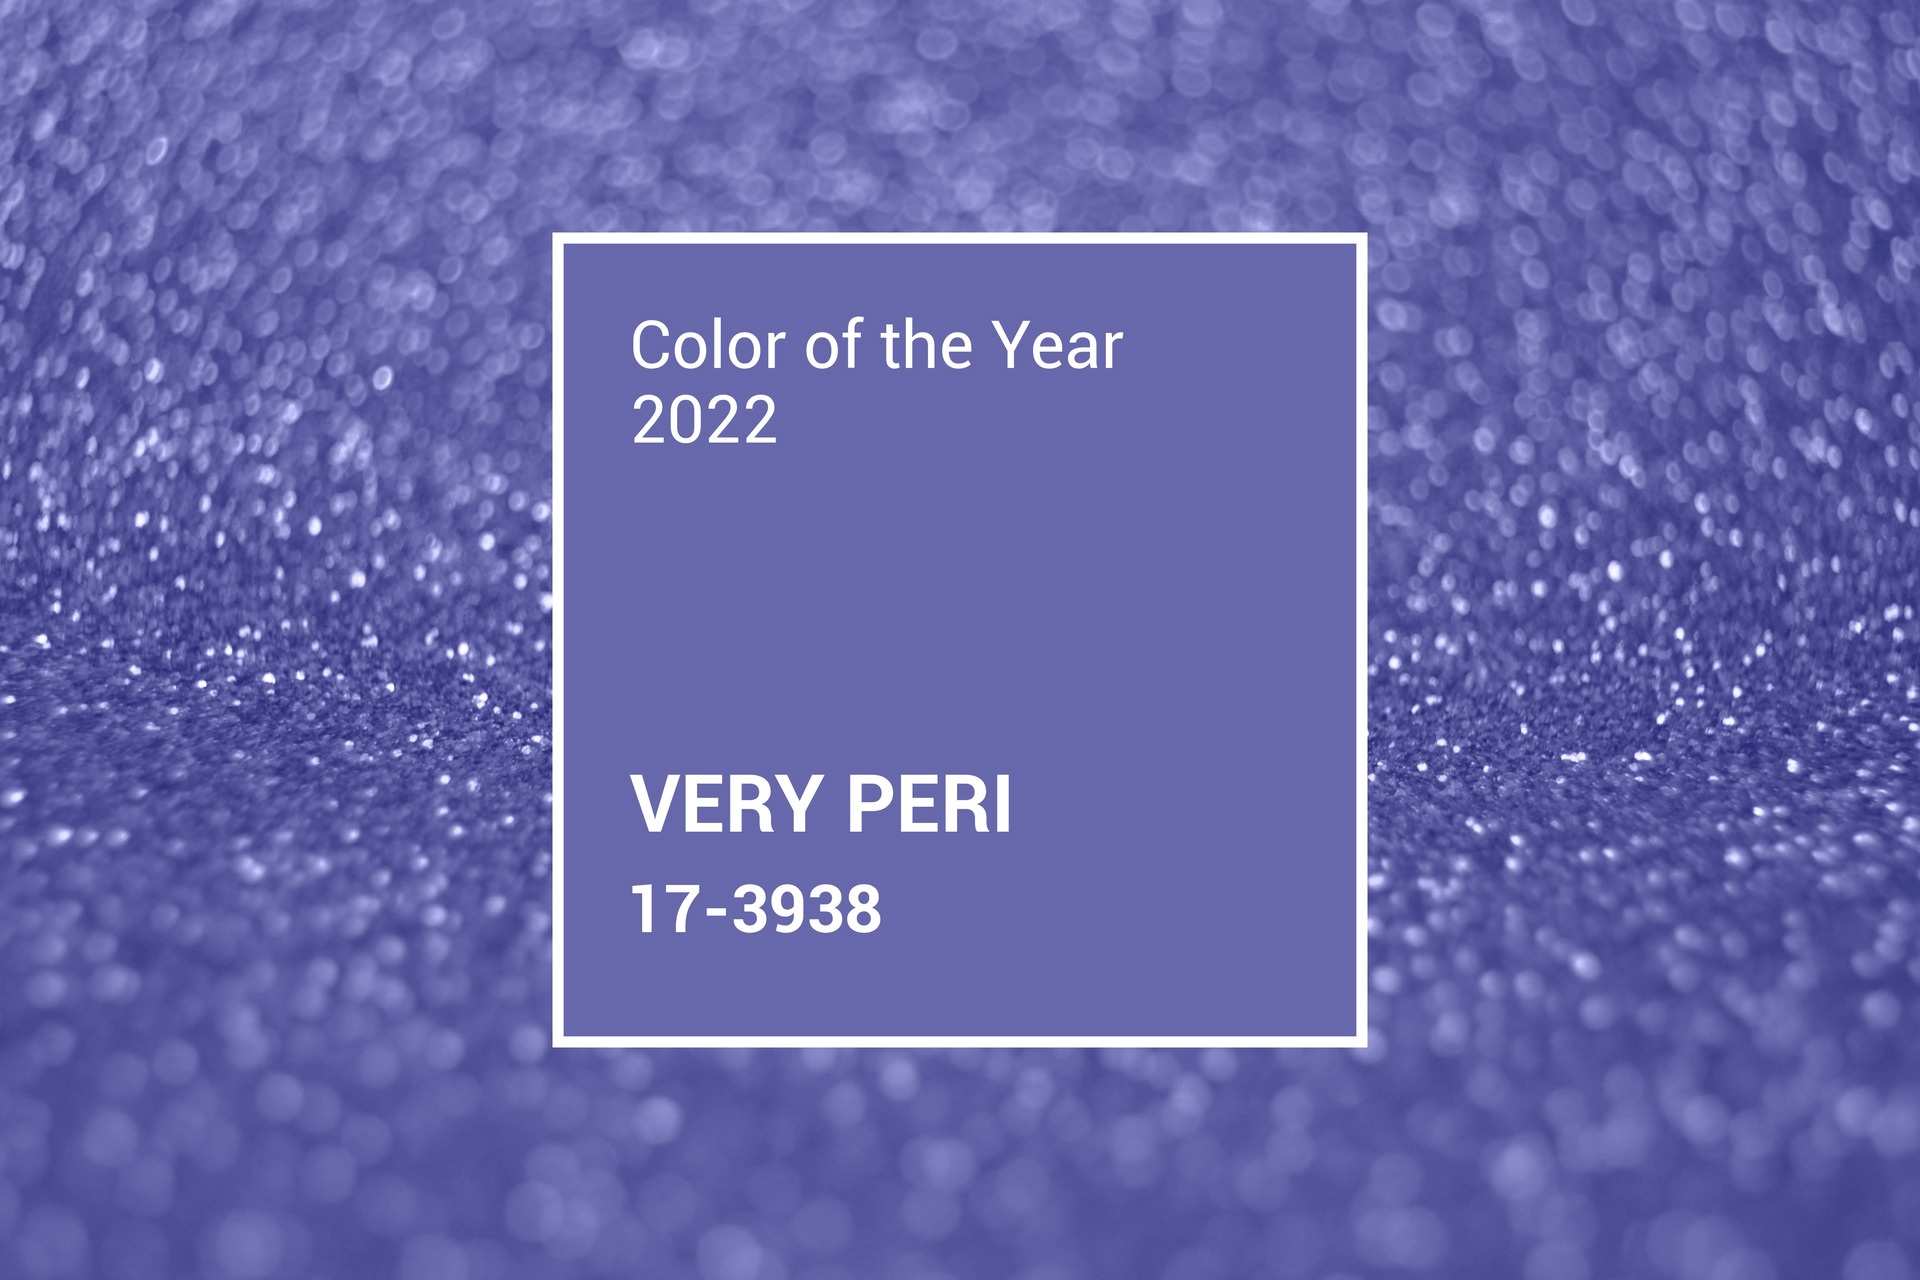 Color swatch of Pantone’s paint color of the year, Very Peri